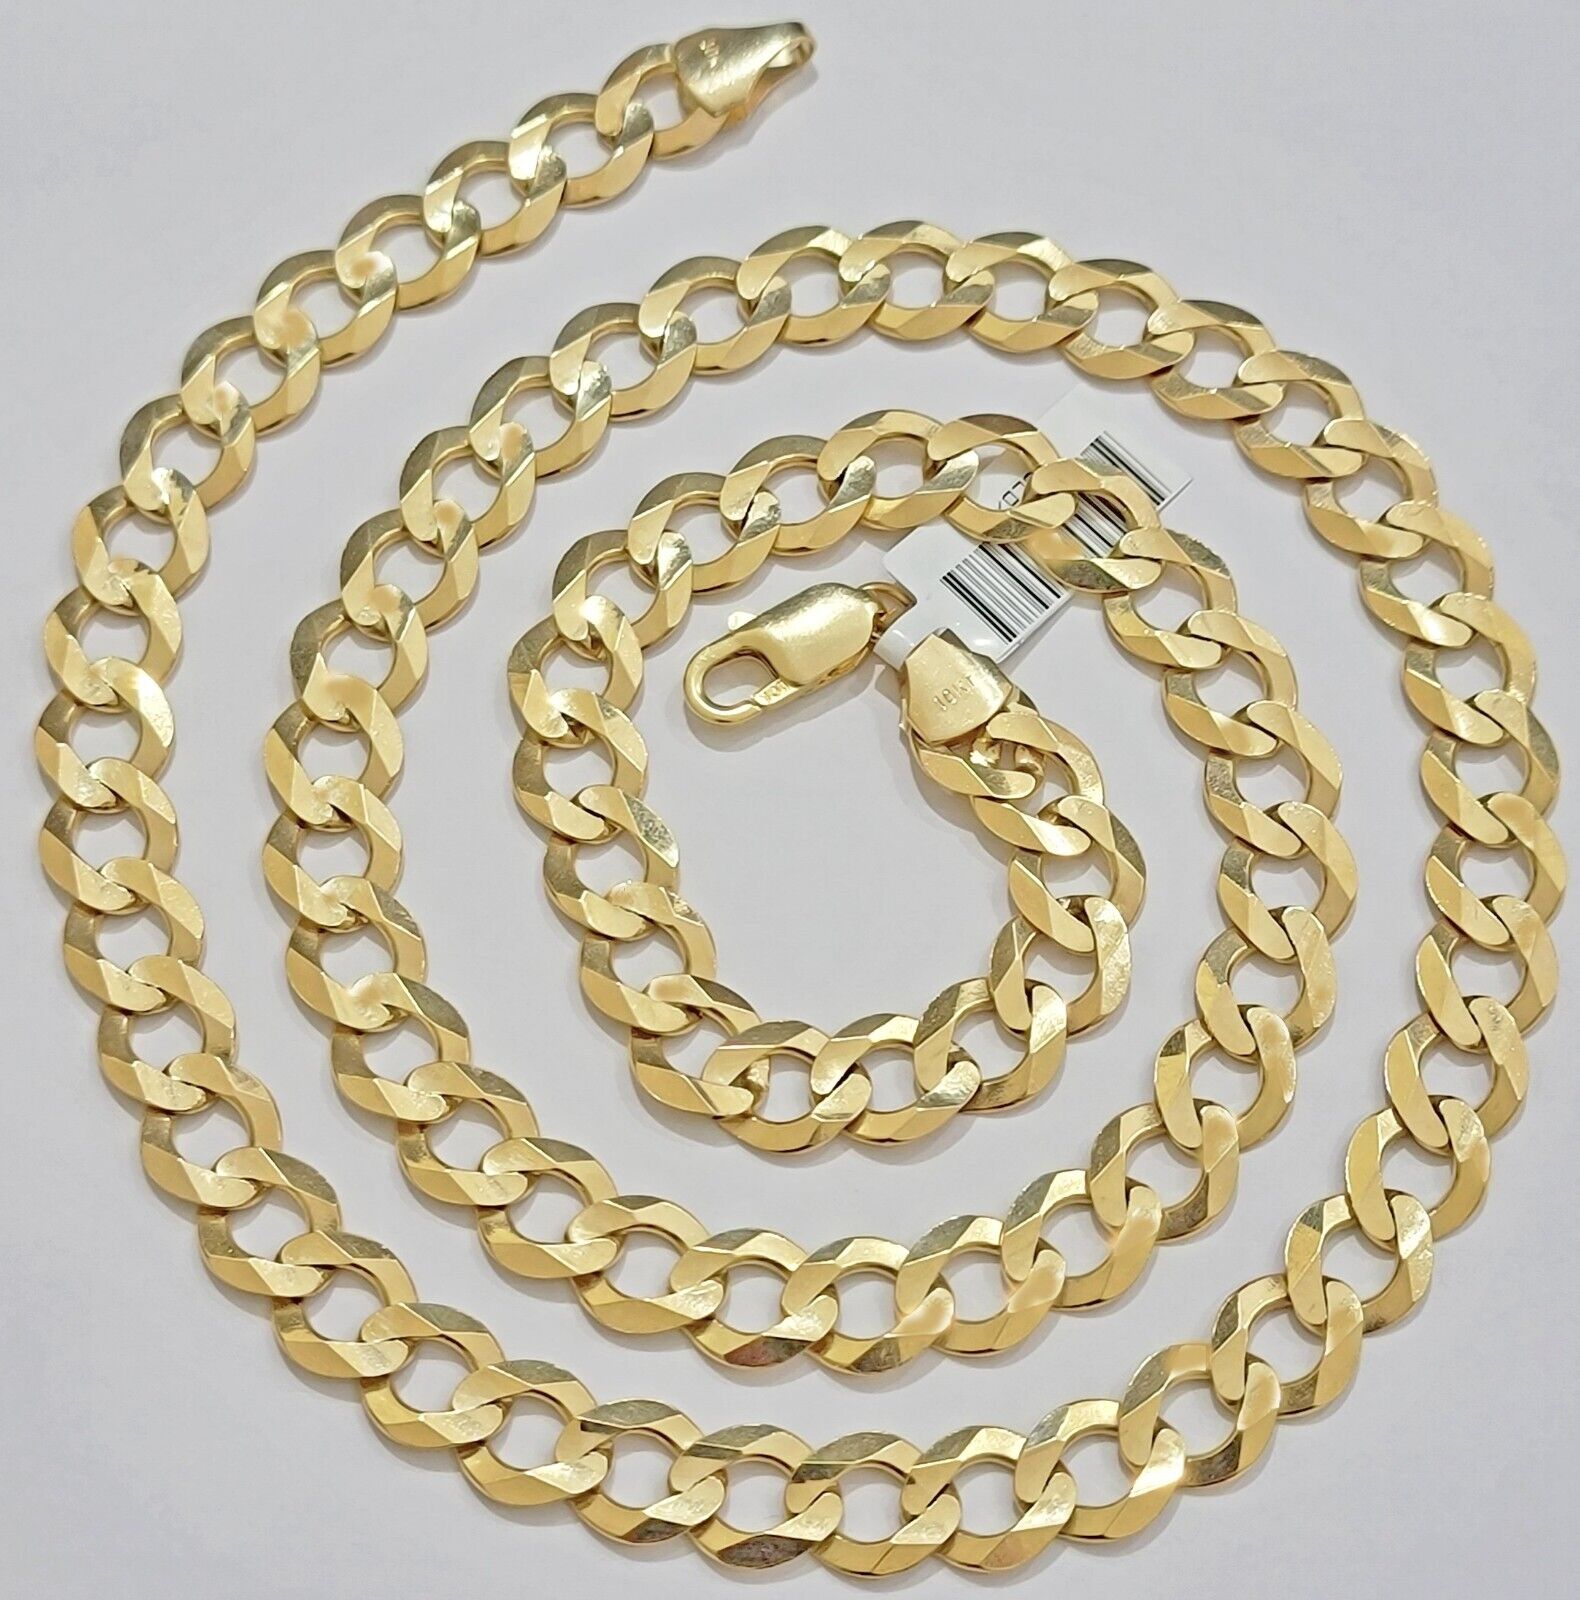 Solid 10k Gold Chain 9mm Mens Necklace Cuban Curb Link 26 inch REAL 10KT STRONG